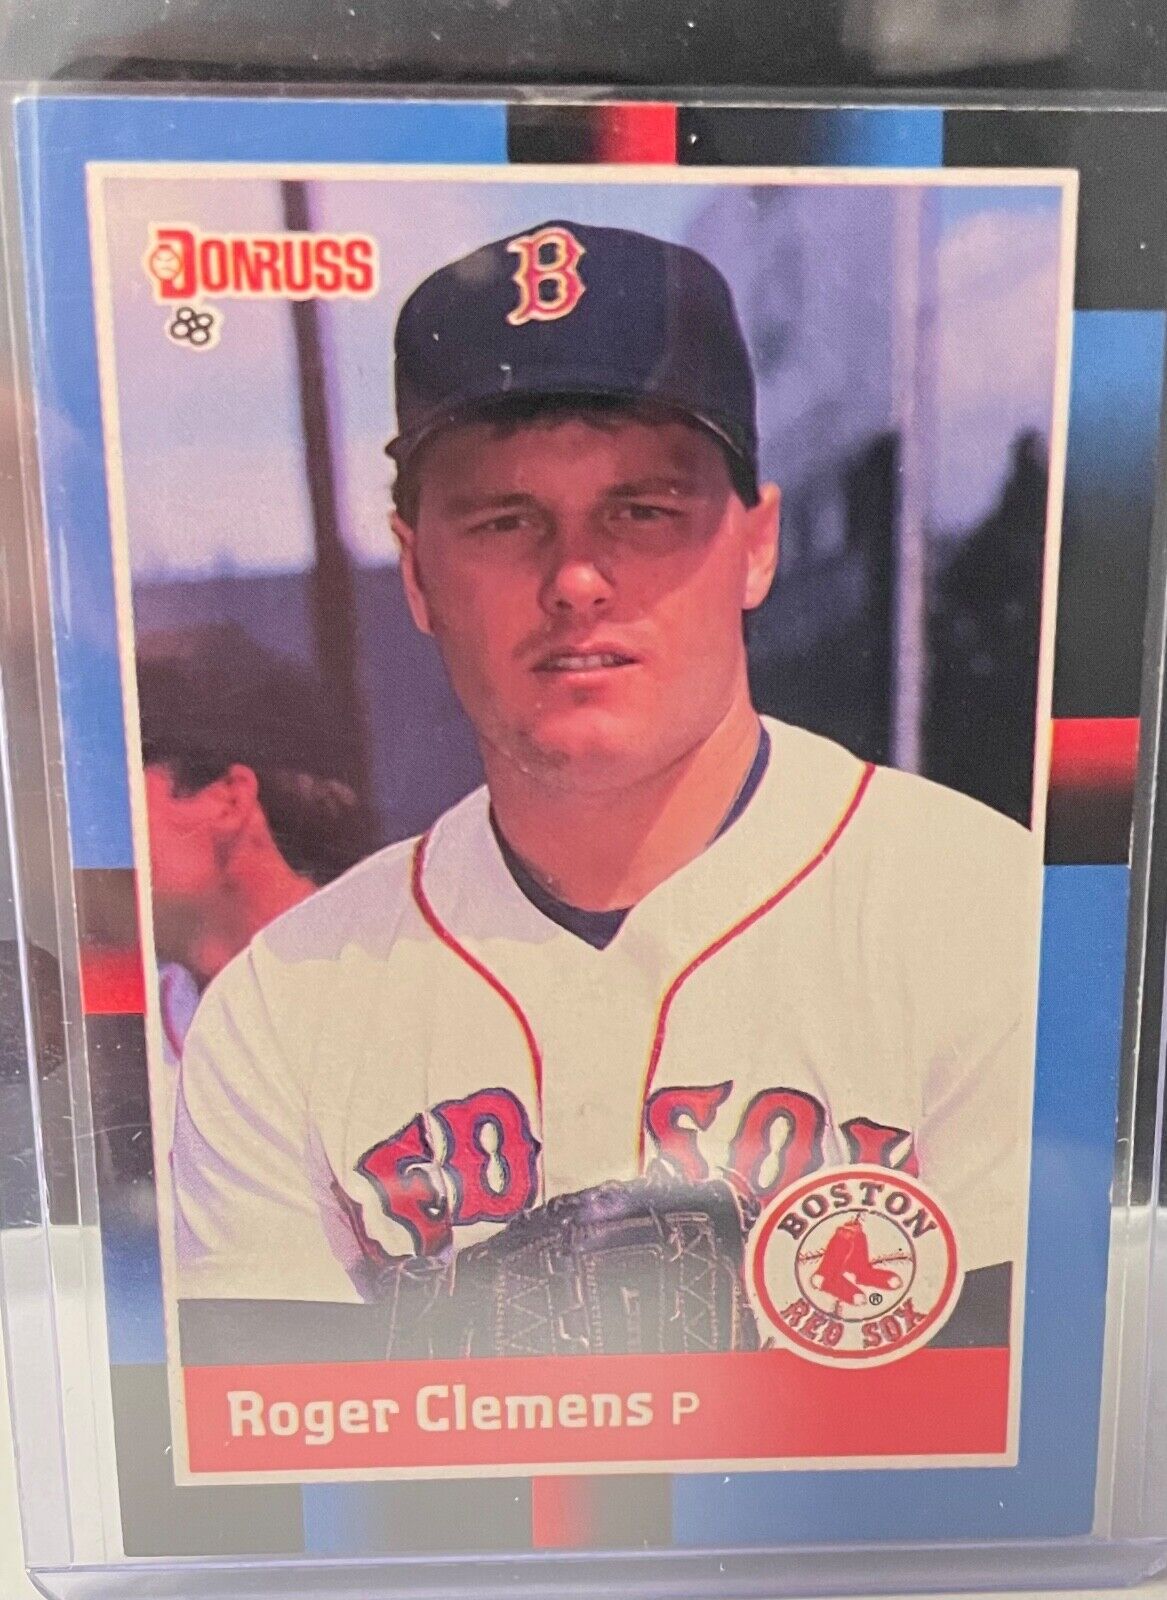 1988 Donruss Roger Clemens #51 one of the greats⚾️⚾️⚾️⚾️!! Boston Red Sox